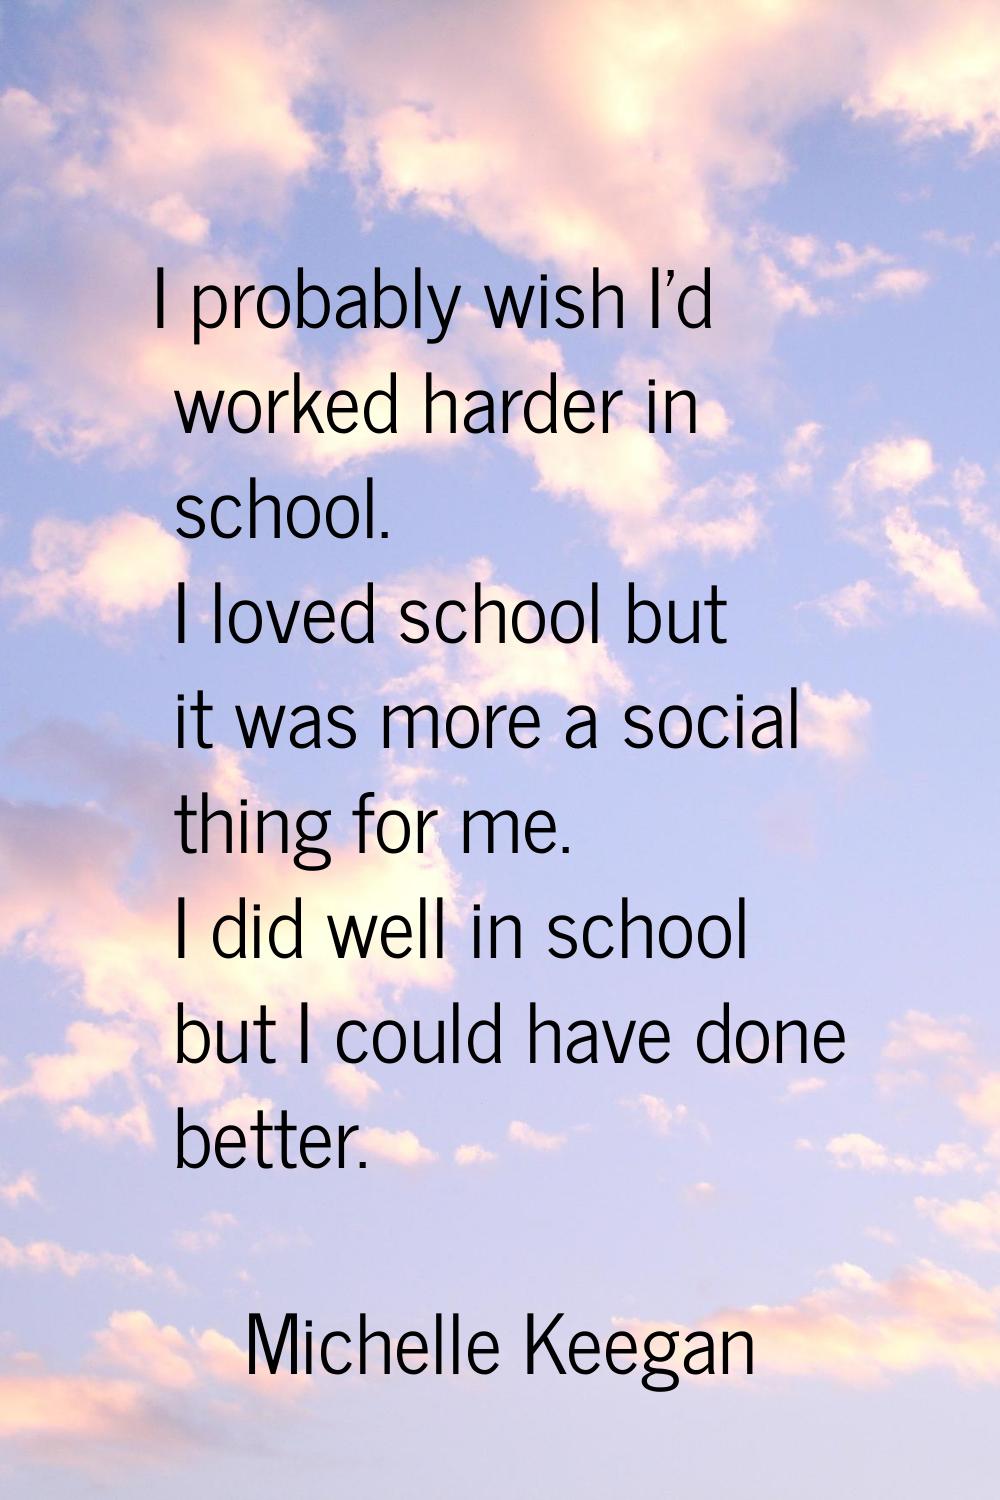 I probably wish I'd worked harder in school. I loved school but it was more a social thing for me. 